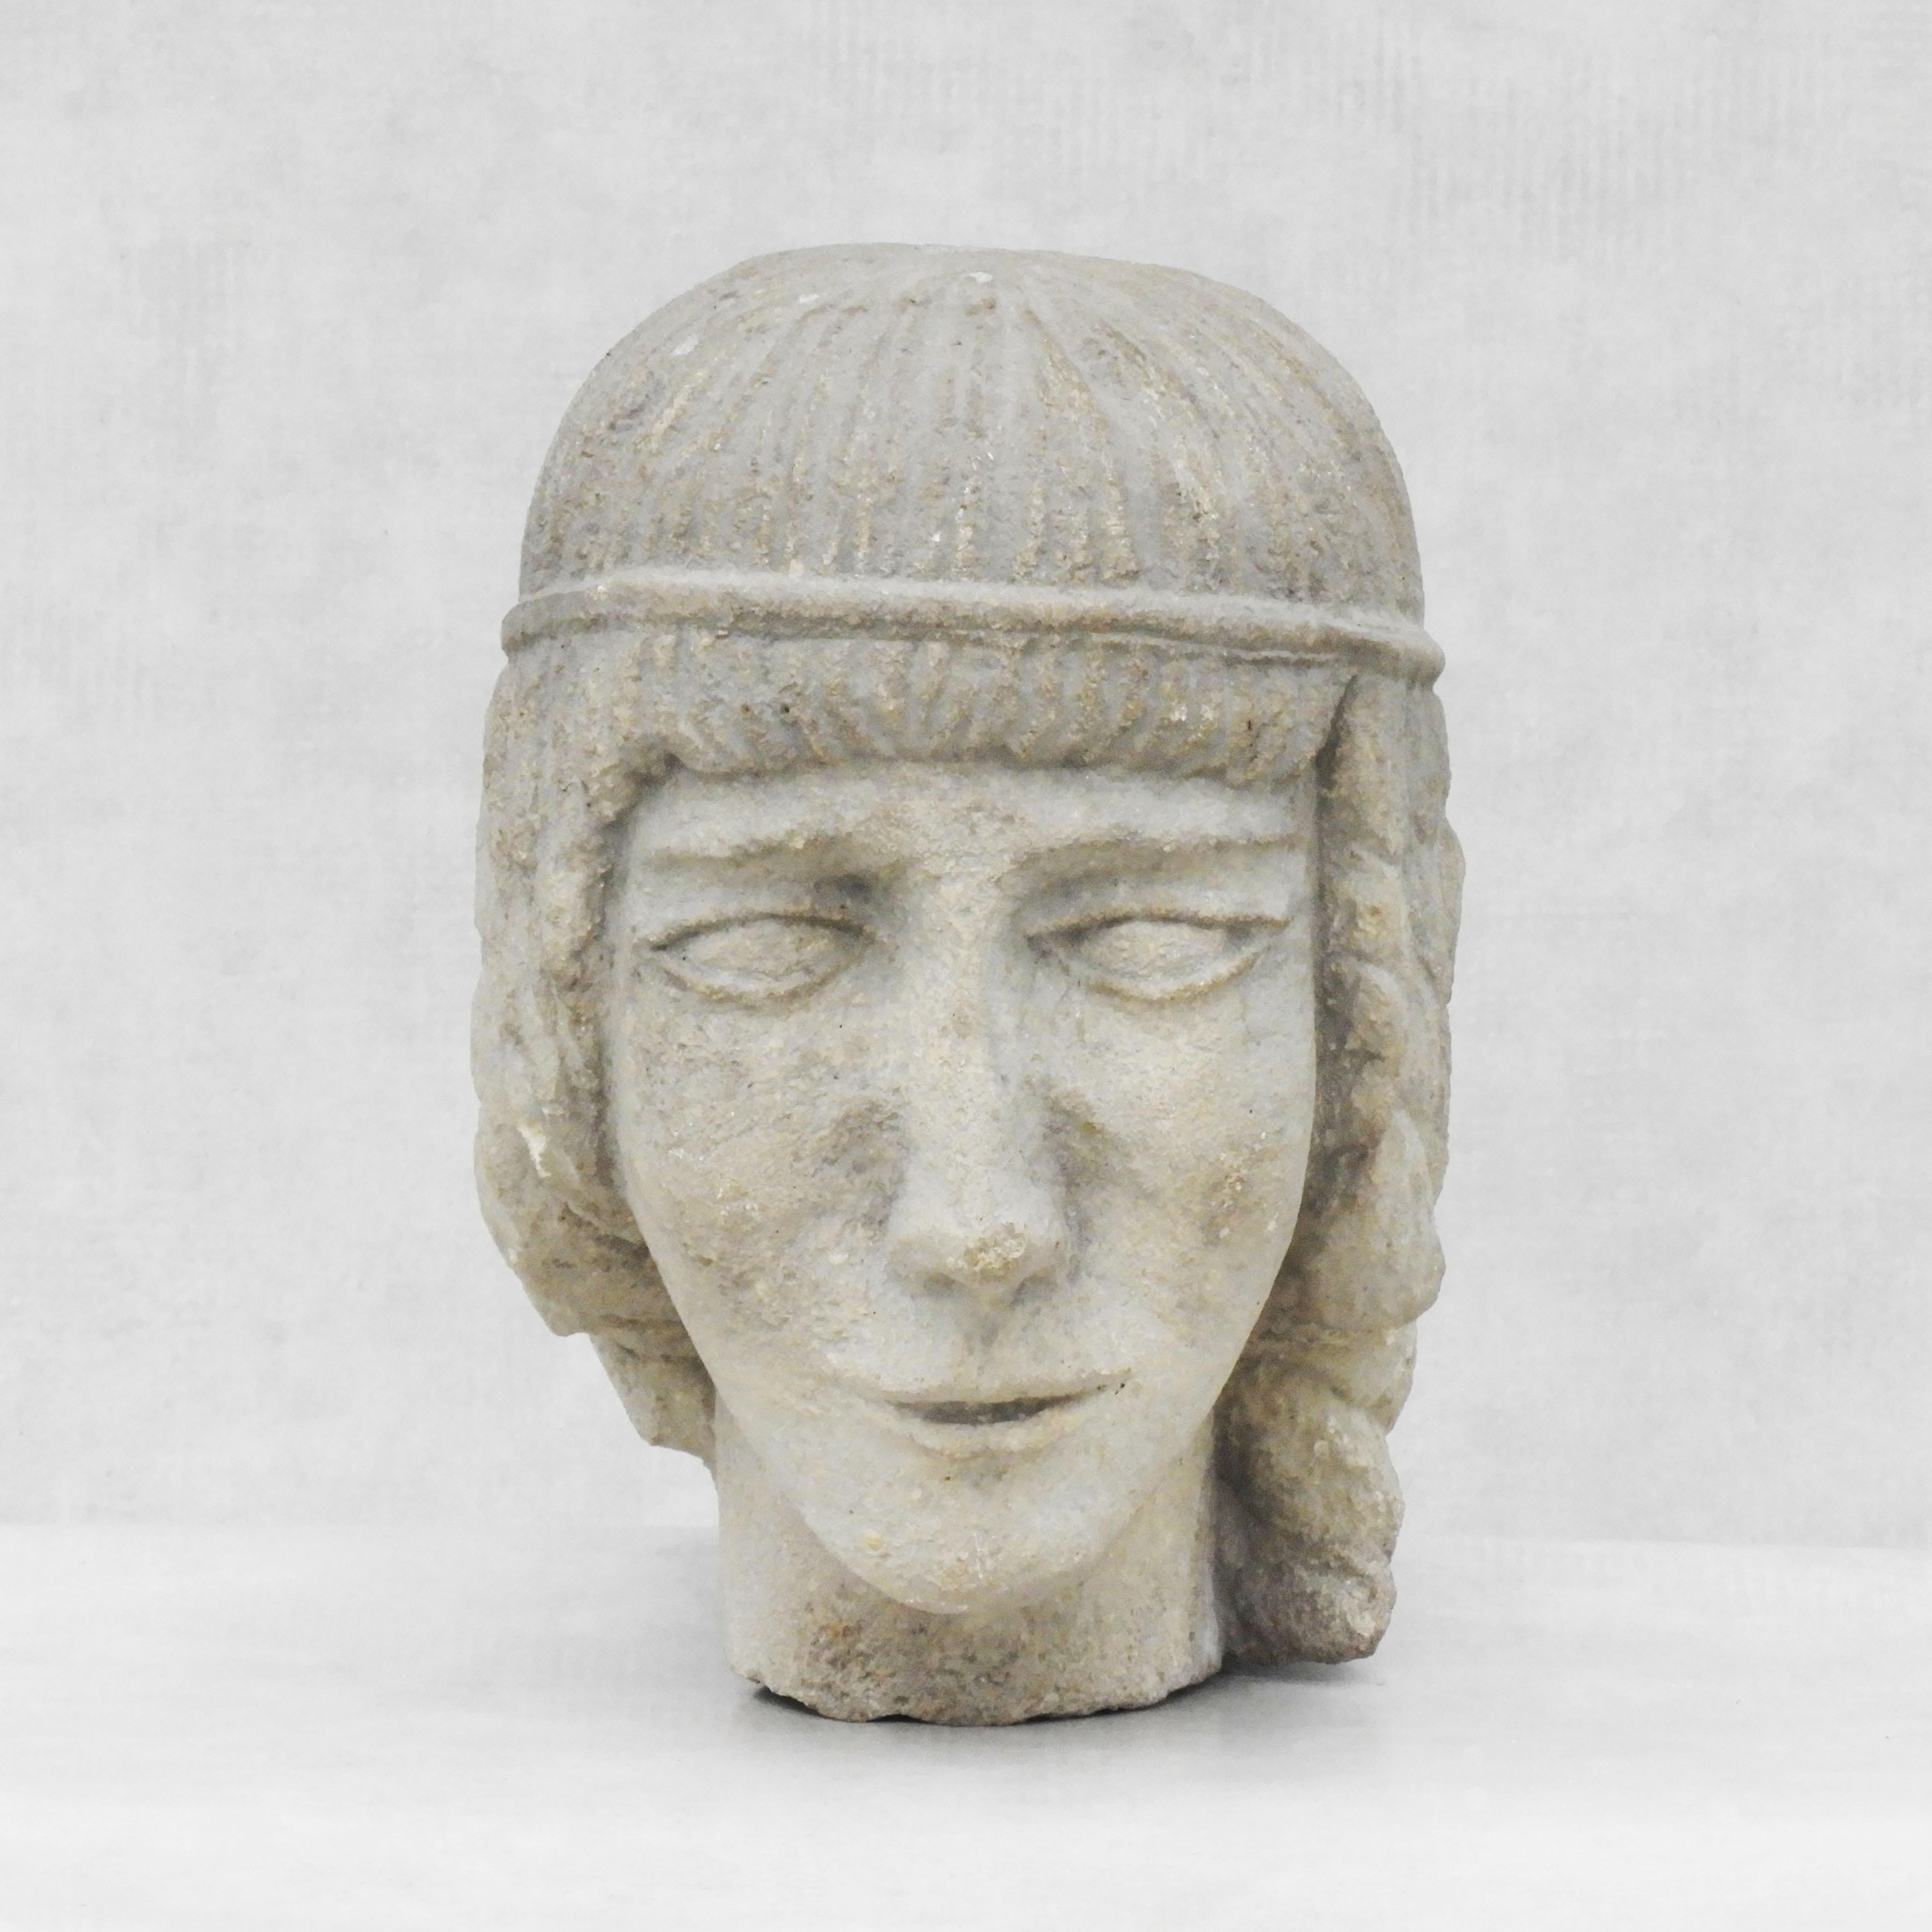 Carved stone female head sculpture c1930s Europe

A stone-carved life-size head sculpture of a young woman by unknown artist.

Well executed with good detailing and nice patina.

Great decorative piece.